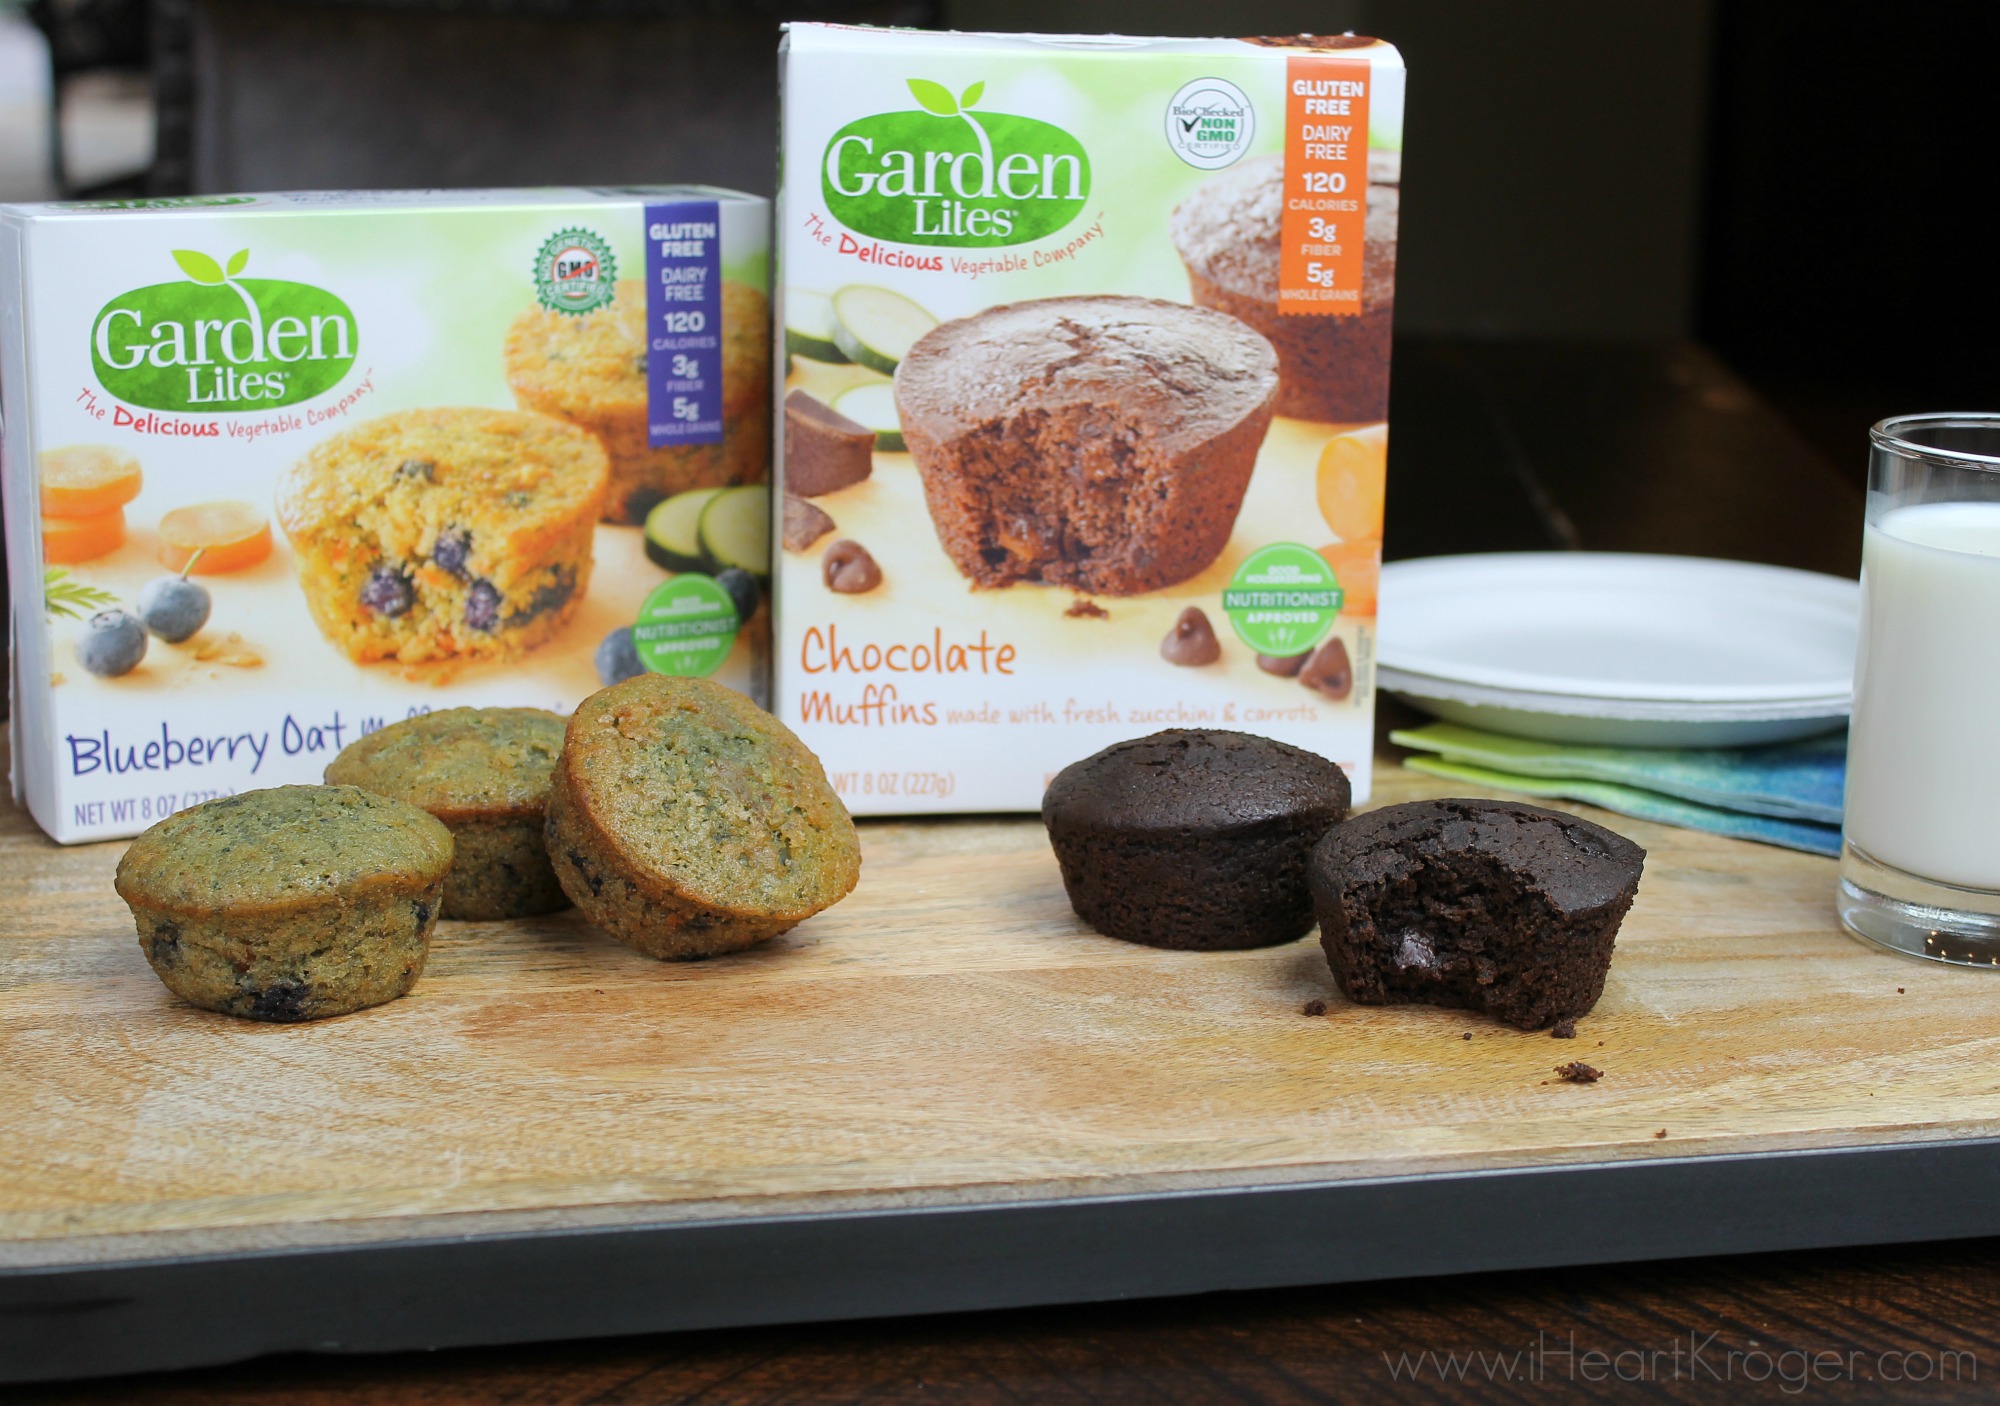 Pick Up Garden Lites Muffins At Publix The Tasty Way To Get Your